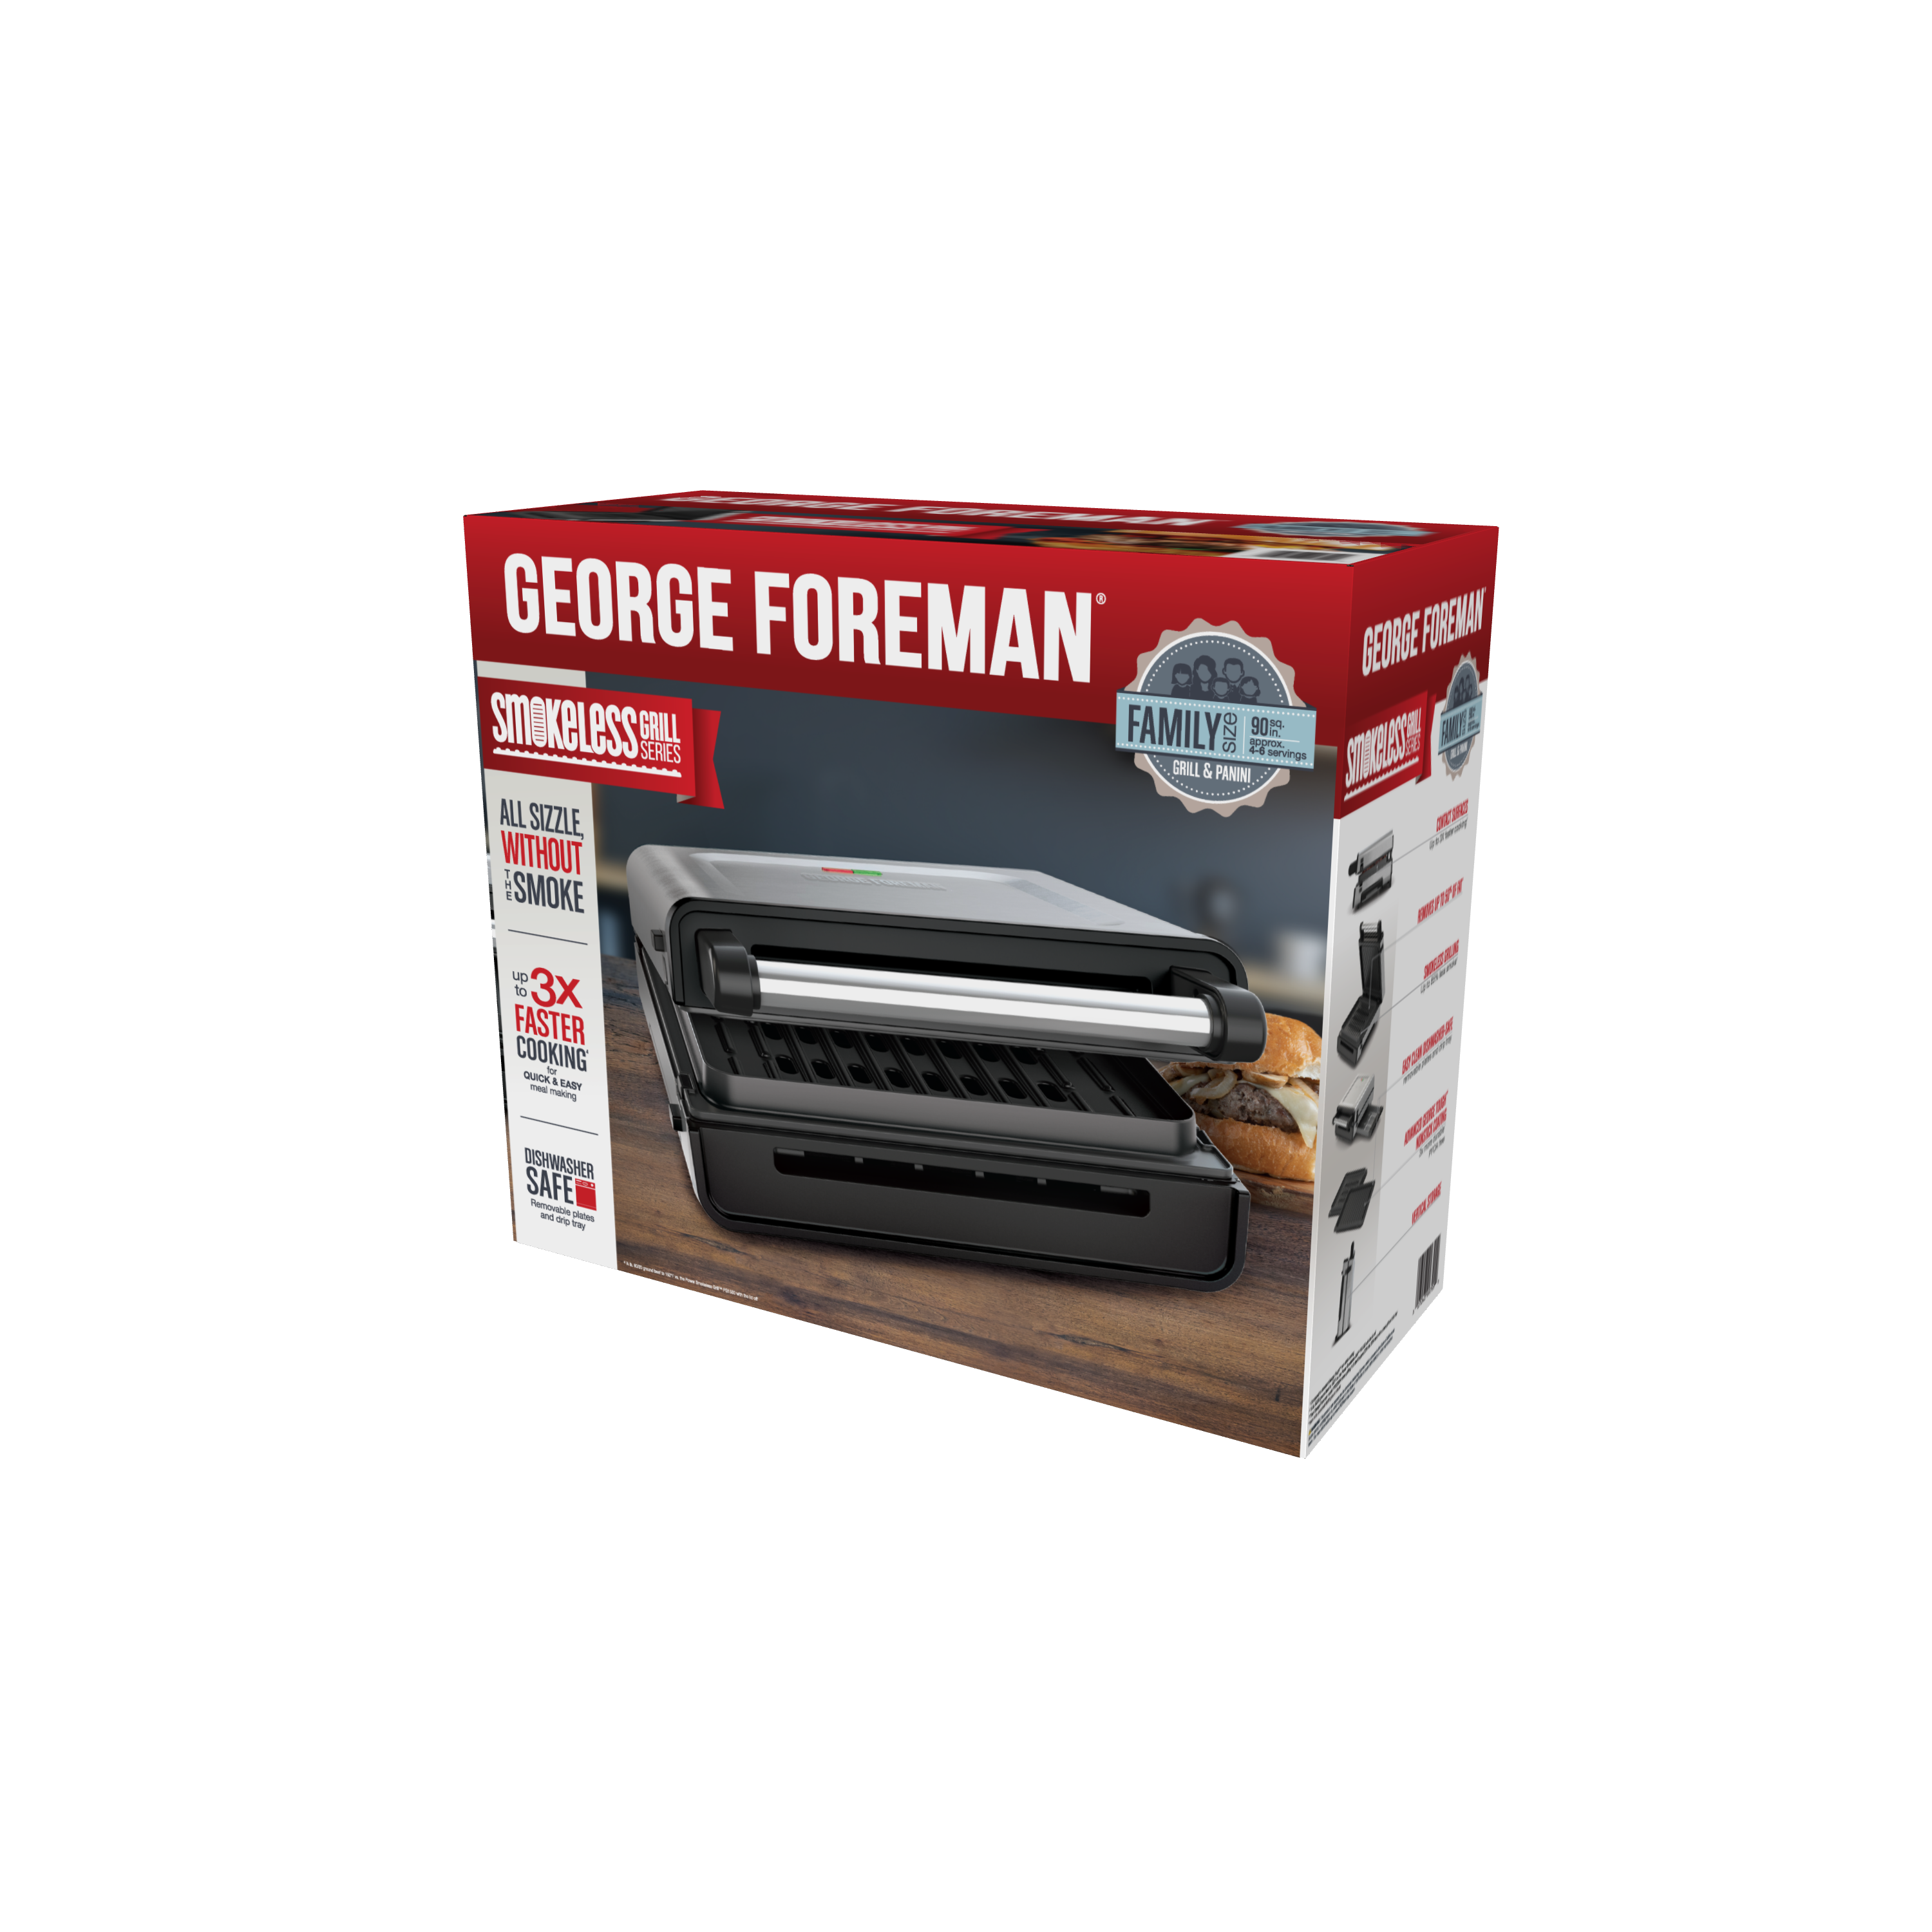 George Foreman Contact Smokeless - Ready Grill, Family Size (4-6 Servings), GRS6090B-1 - image 4 of 8